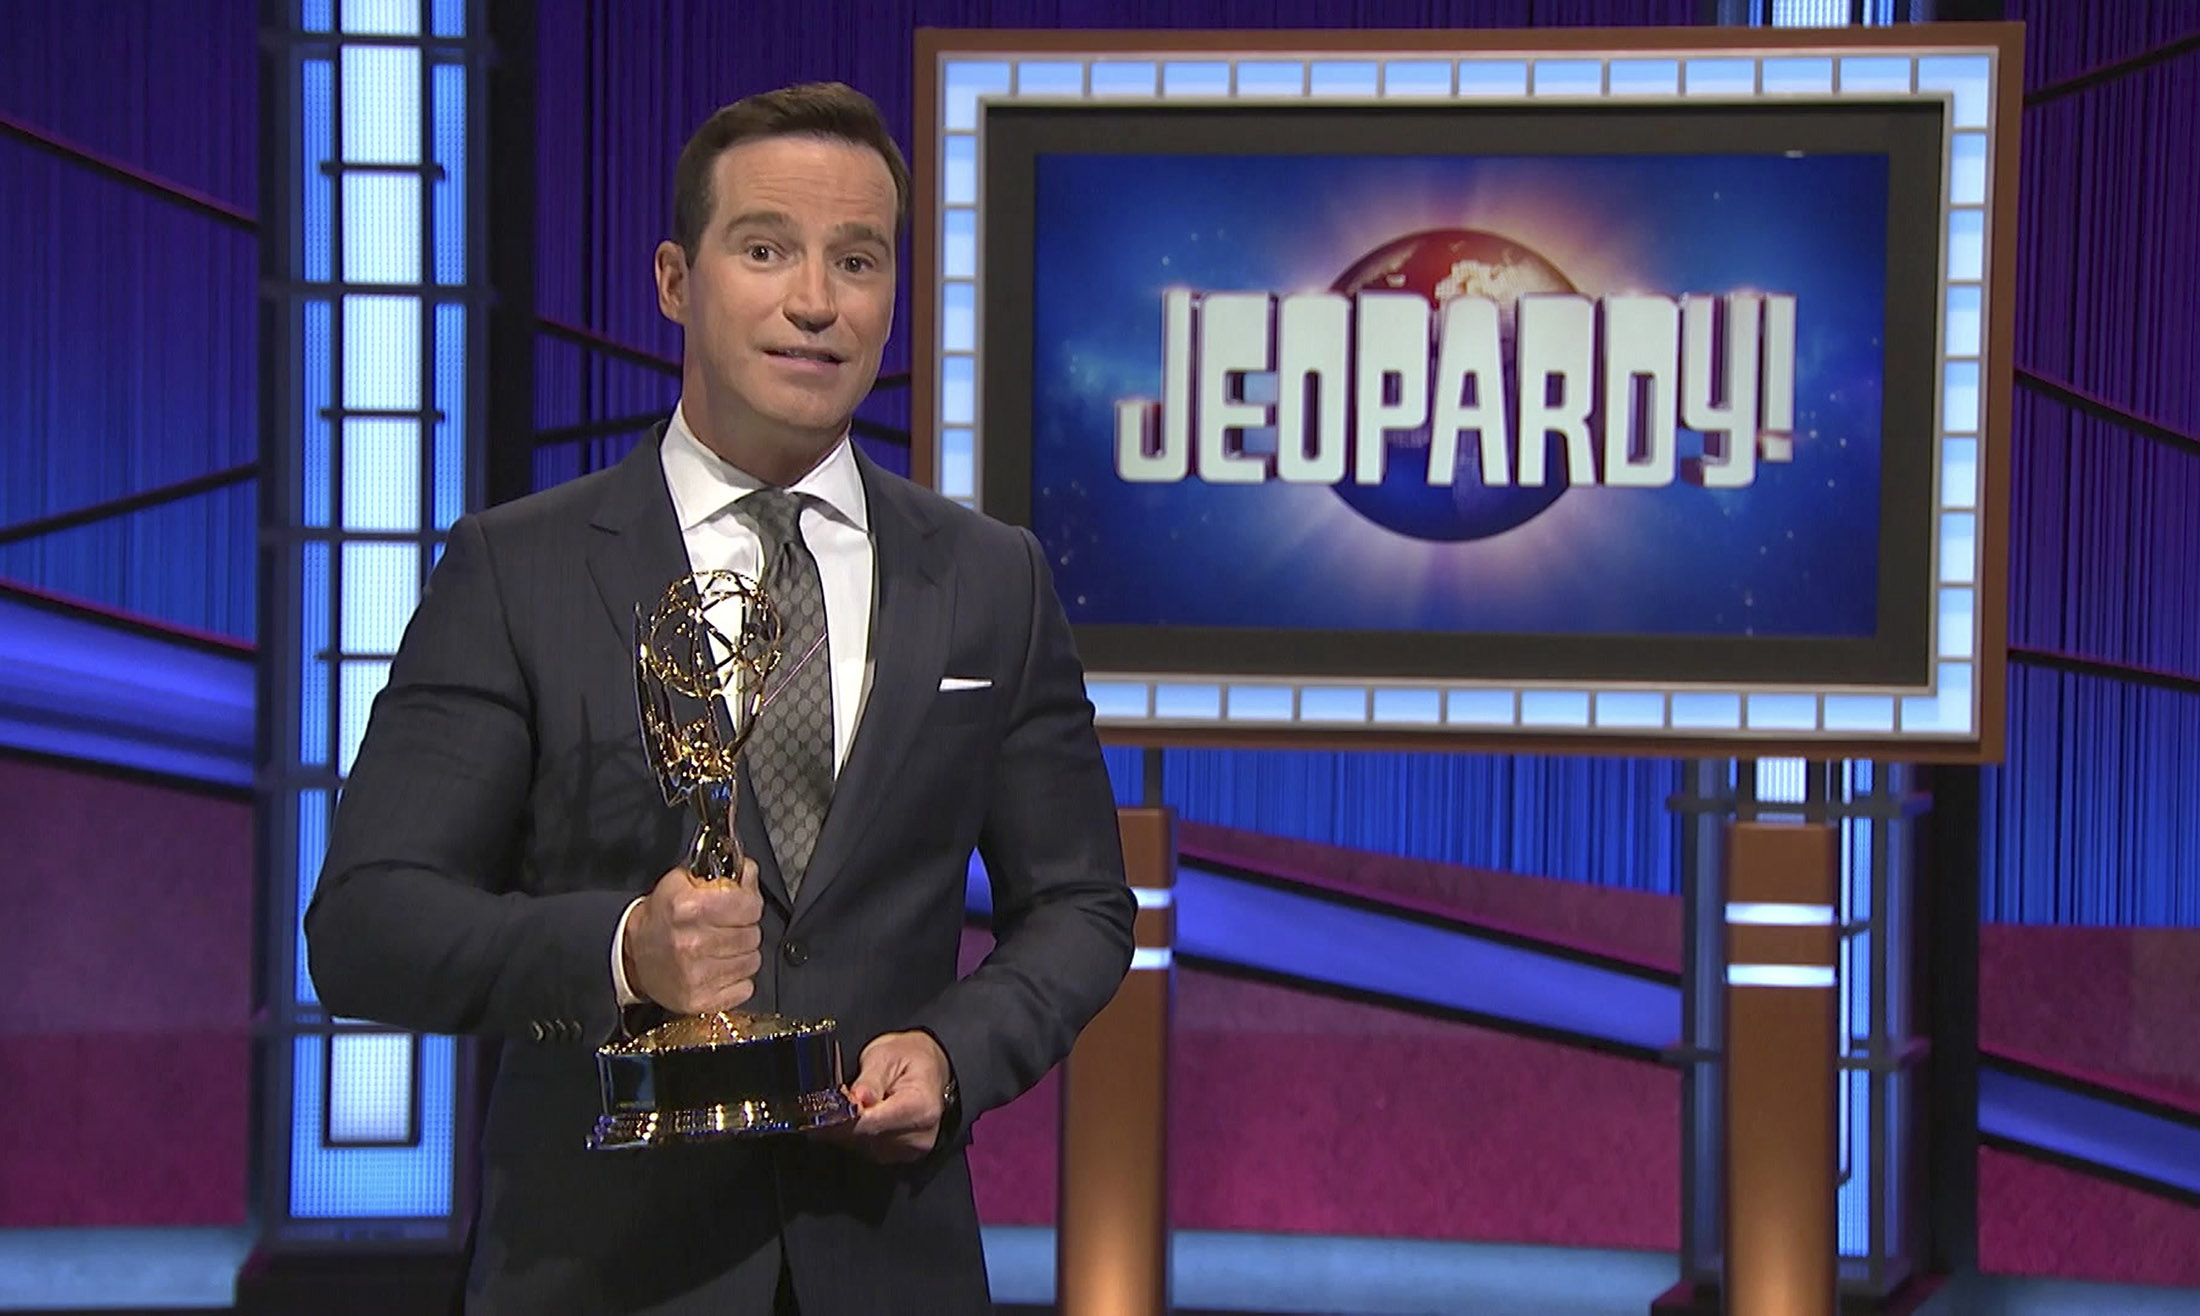 Mike Richards to replace Alex Trebek as 'Jeopardy!' host; Mayim